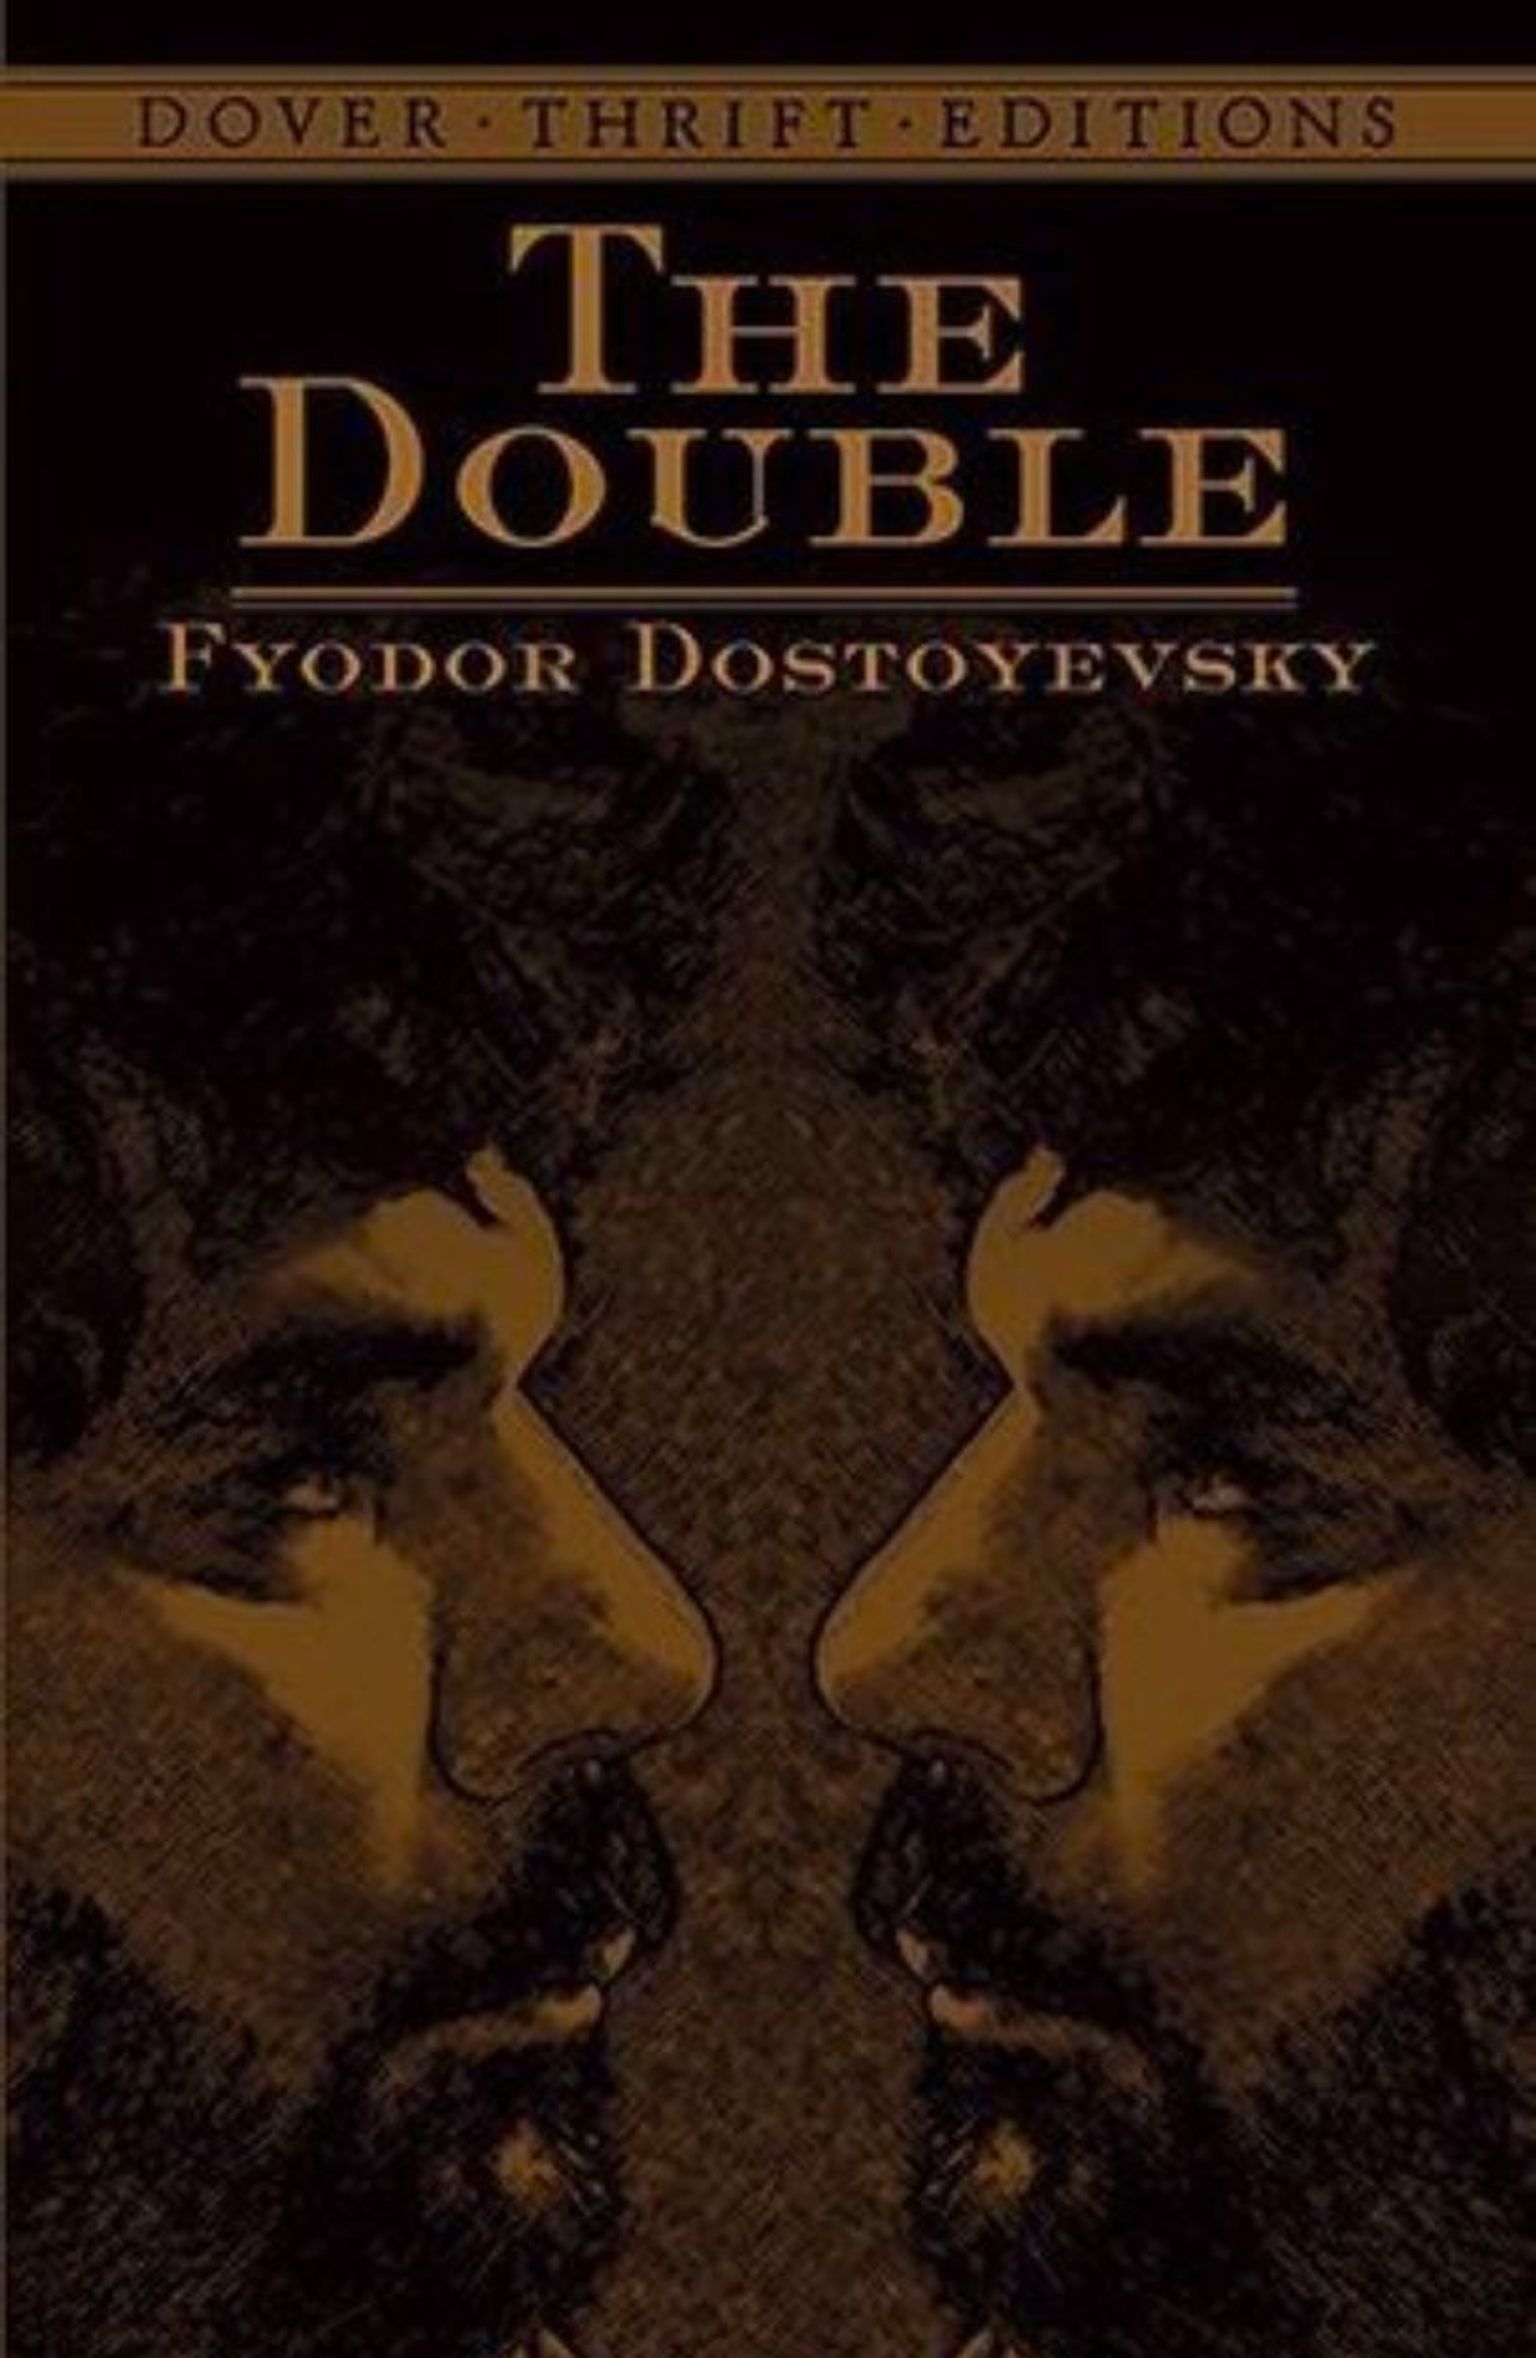 Book Recommendations - The Double